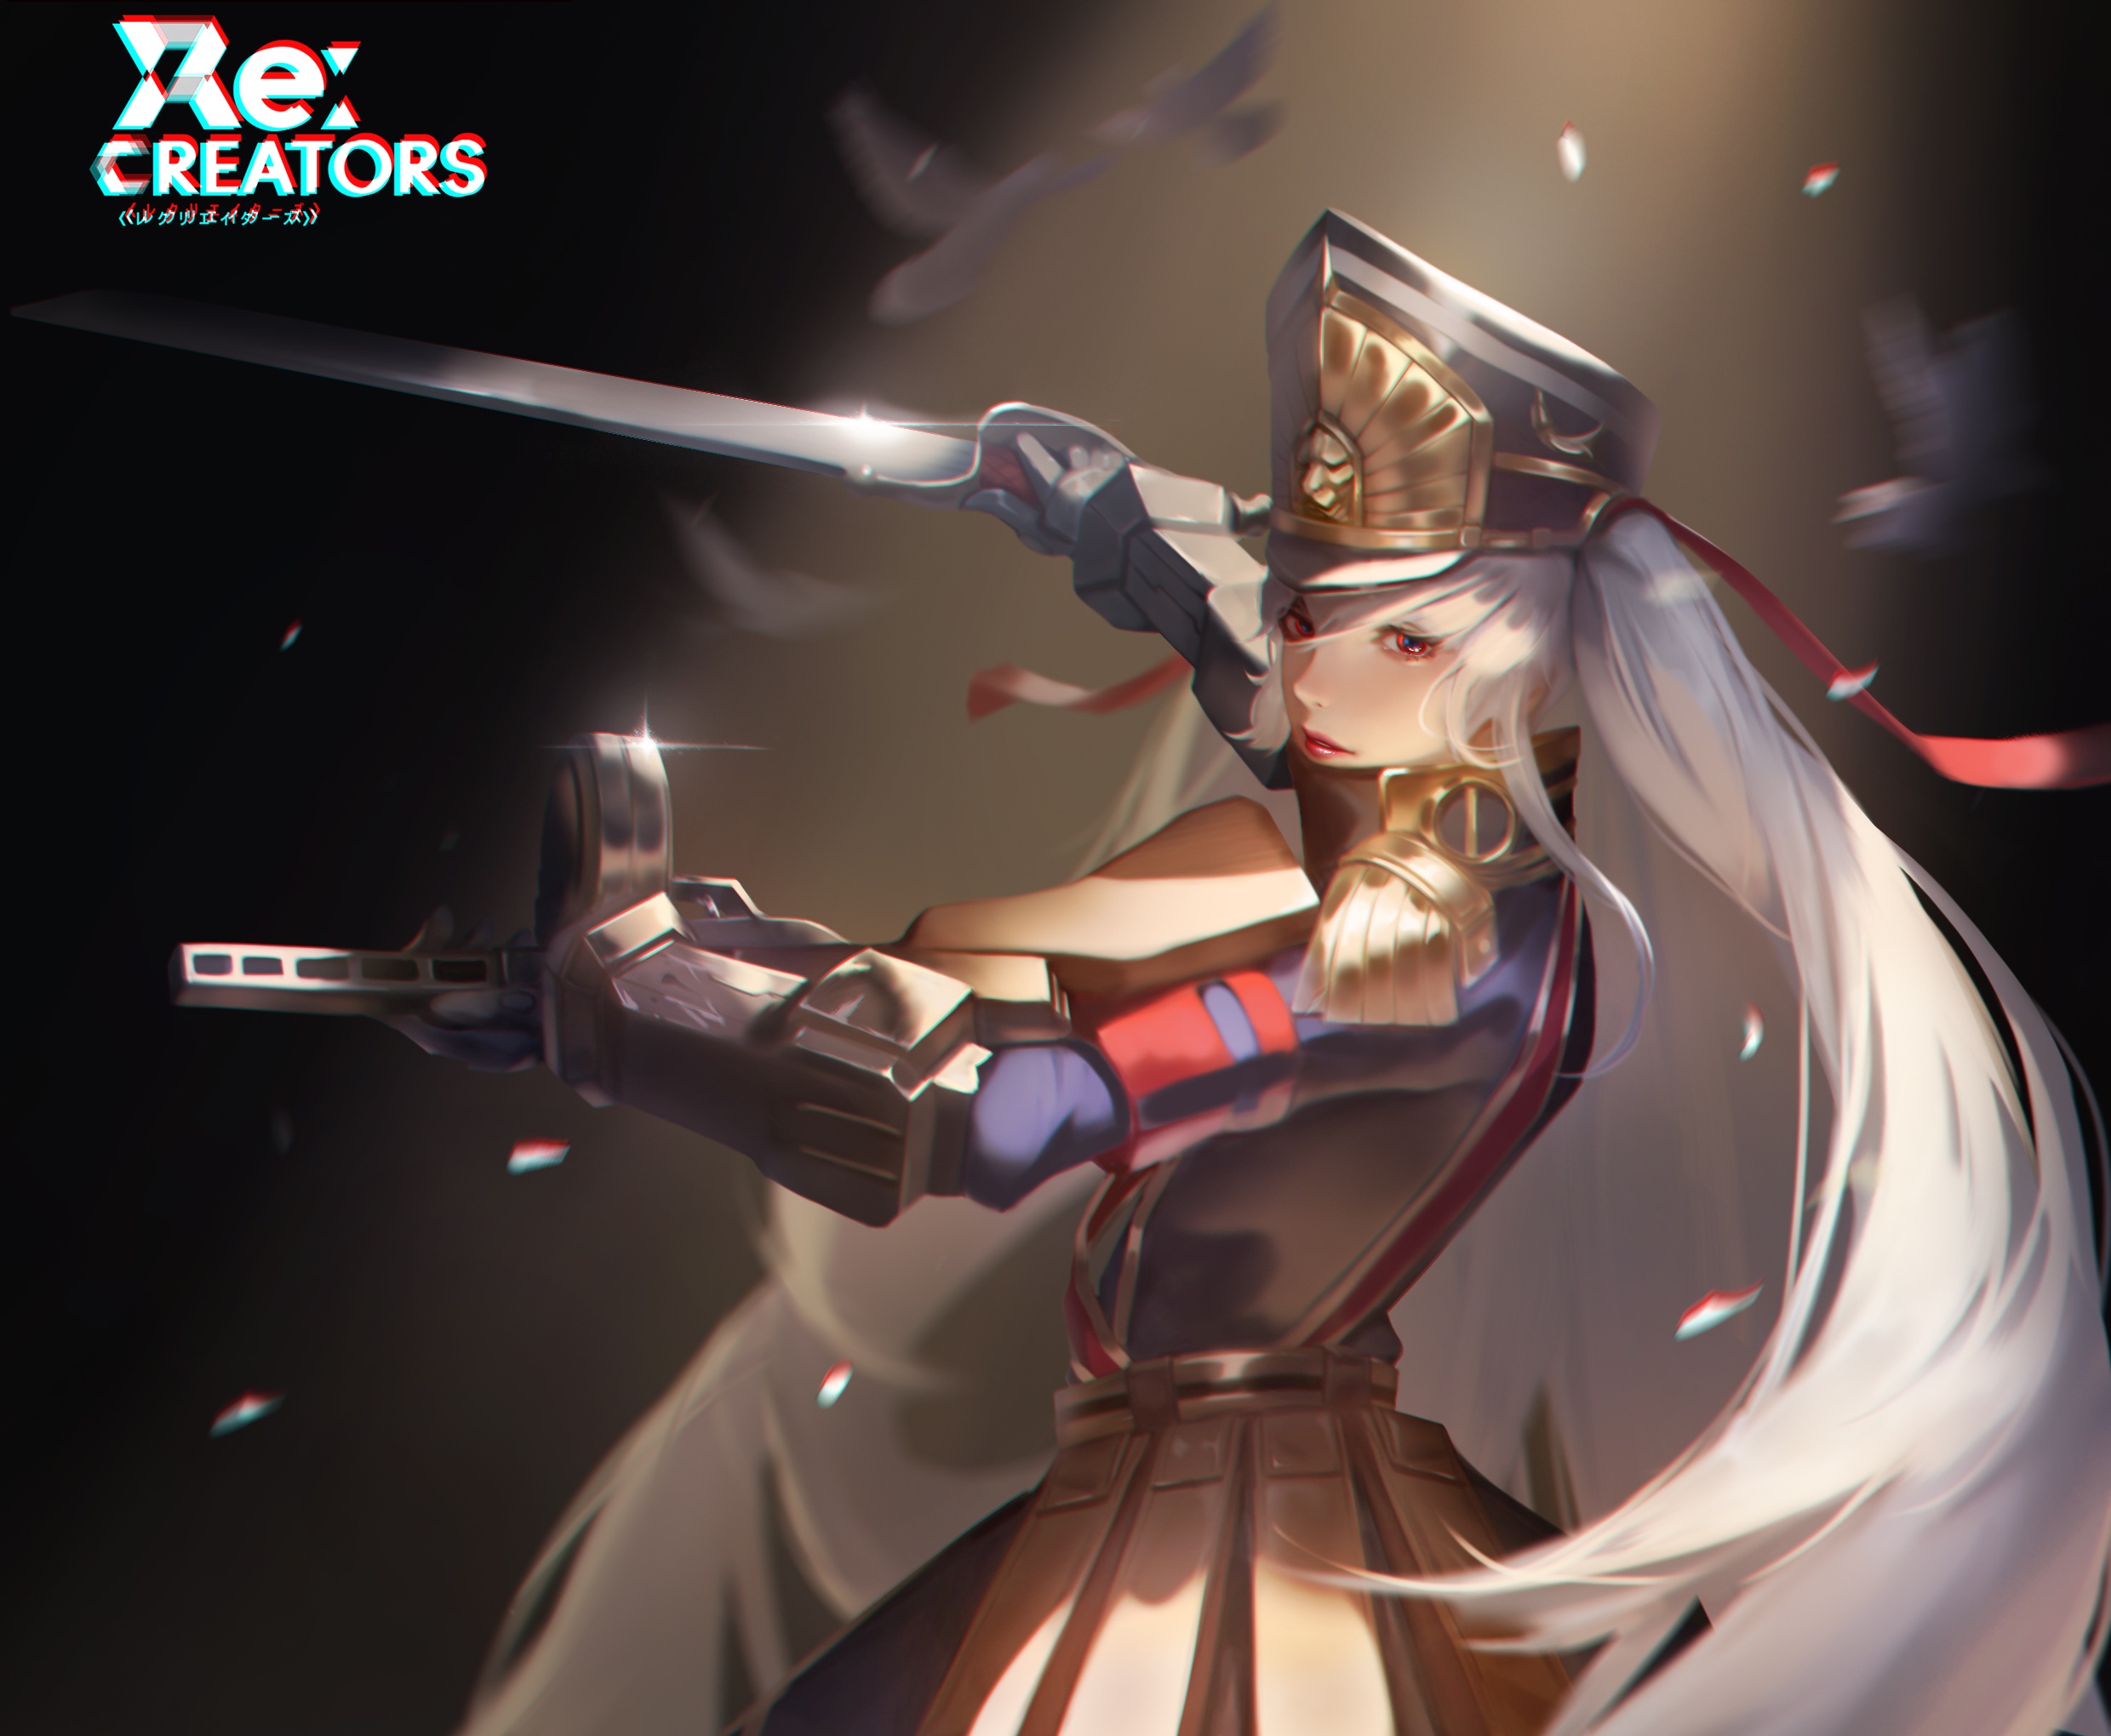 Desktop Wallpaper Altair ReCreators Anime Girl Angry Hd Image  Picture Background 0syg49